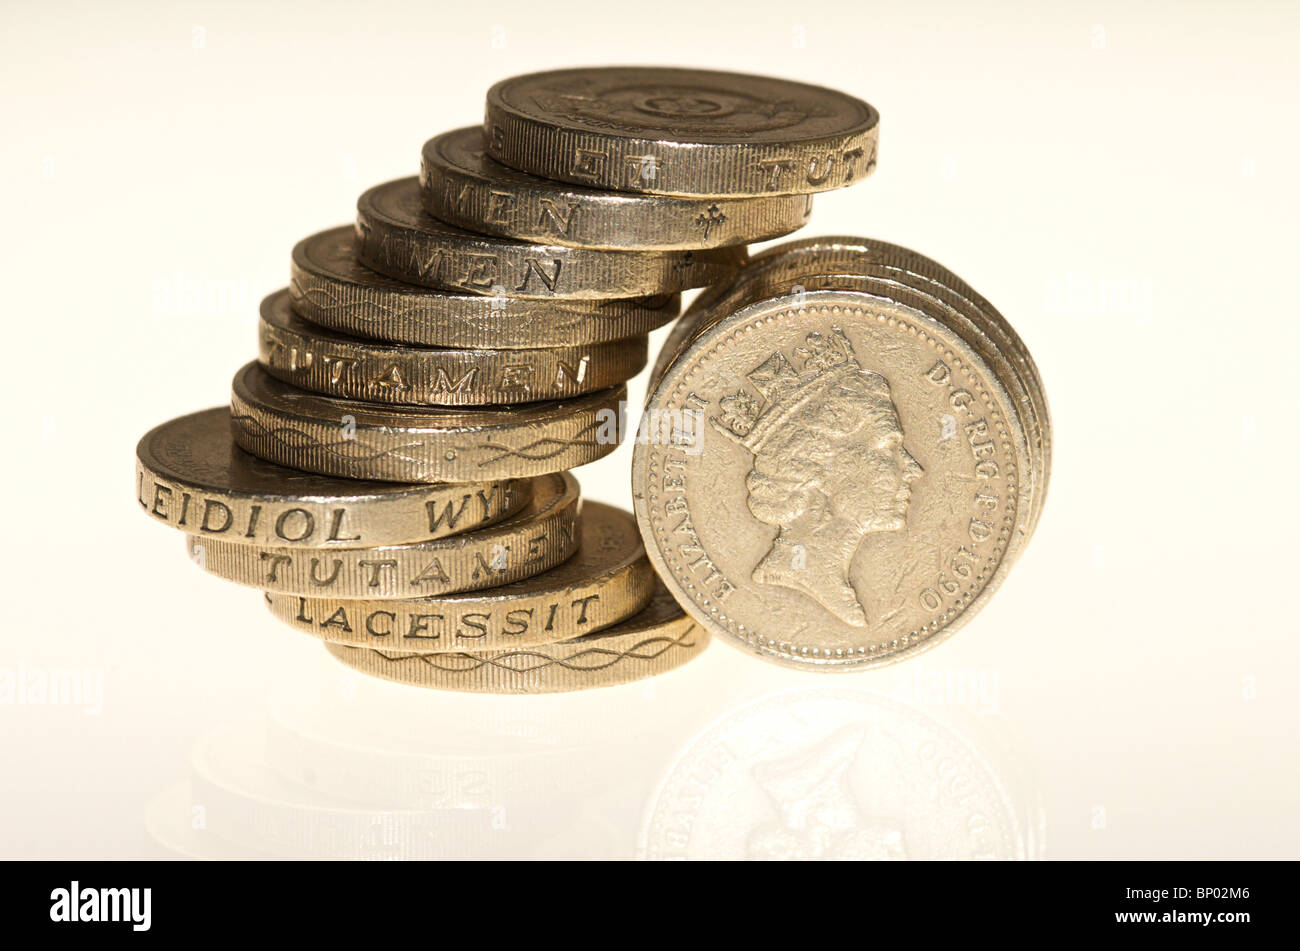 A pile or stack of one pound coins Stock Photo